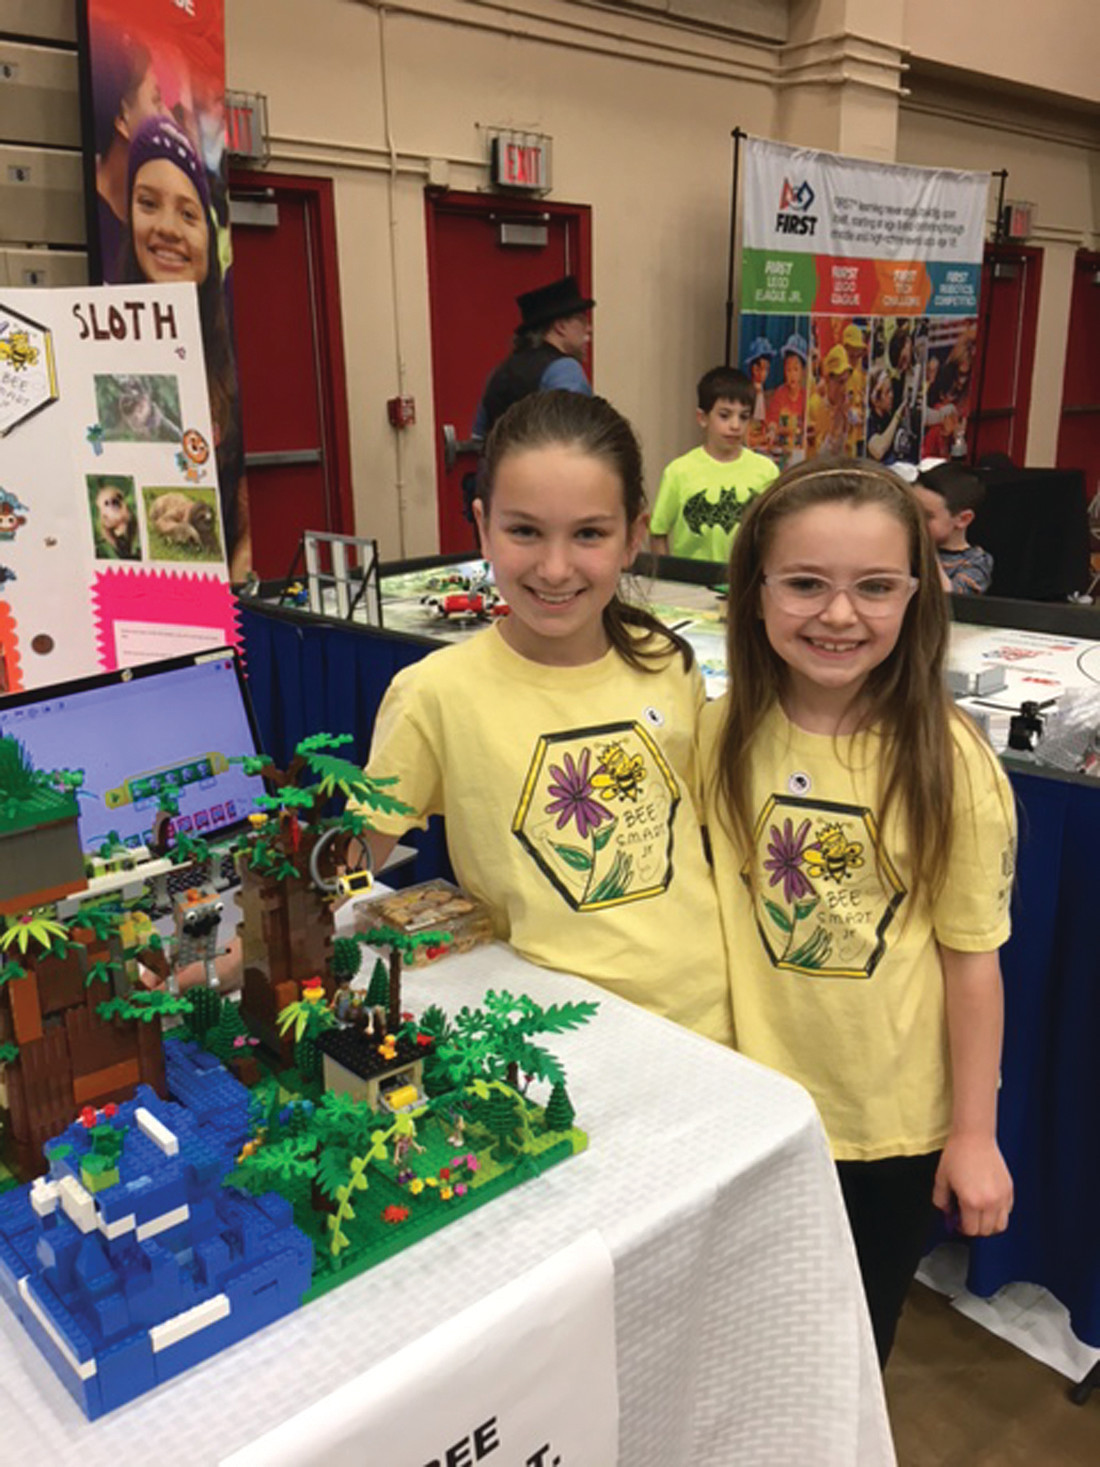 THEIR CREATION: Third graders Madison Medeiros (left) and Aurora Christiansen proudly display their legs robotics project at Sunday’s Robot Block Party.